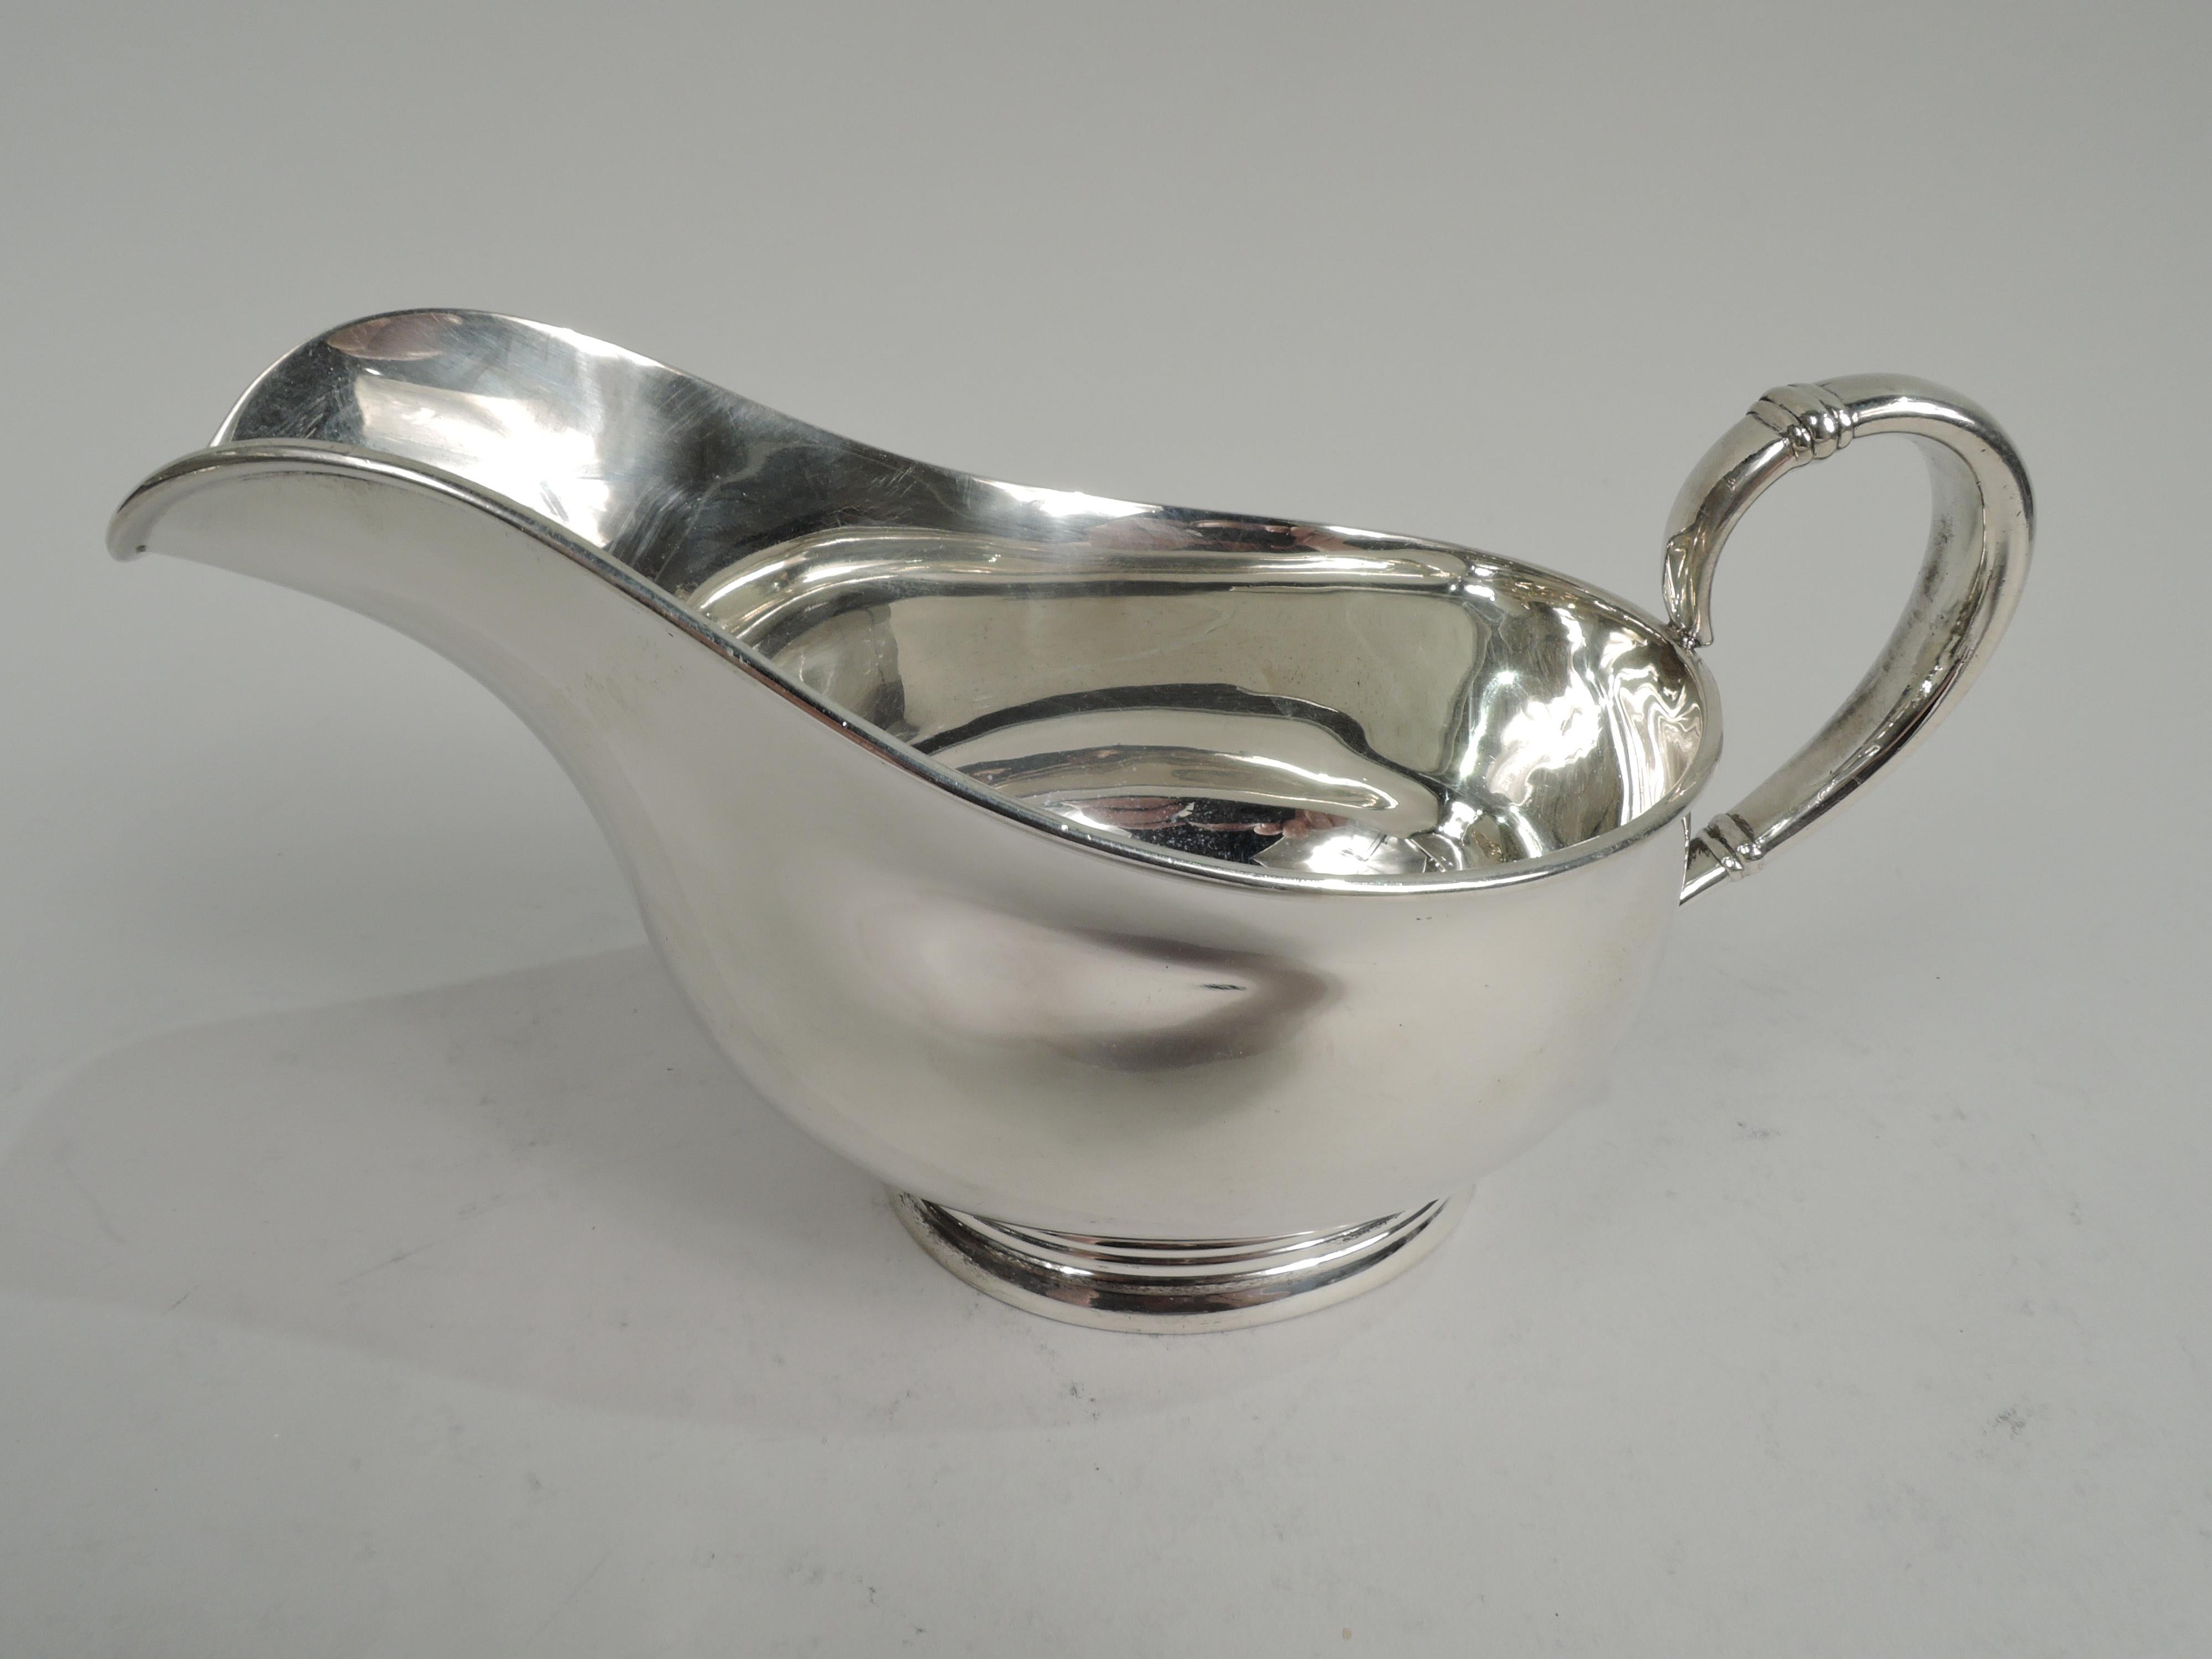 Royal Danish sterling silver gravy boat on stand. Made by International in Meriden, Conn. Boat bellied with helmet mouth, banded scroll handle, and oval reeded foot. Stand ovalish with pierced acorn motif at ends. Desirable pieces in the classic